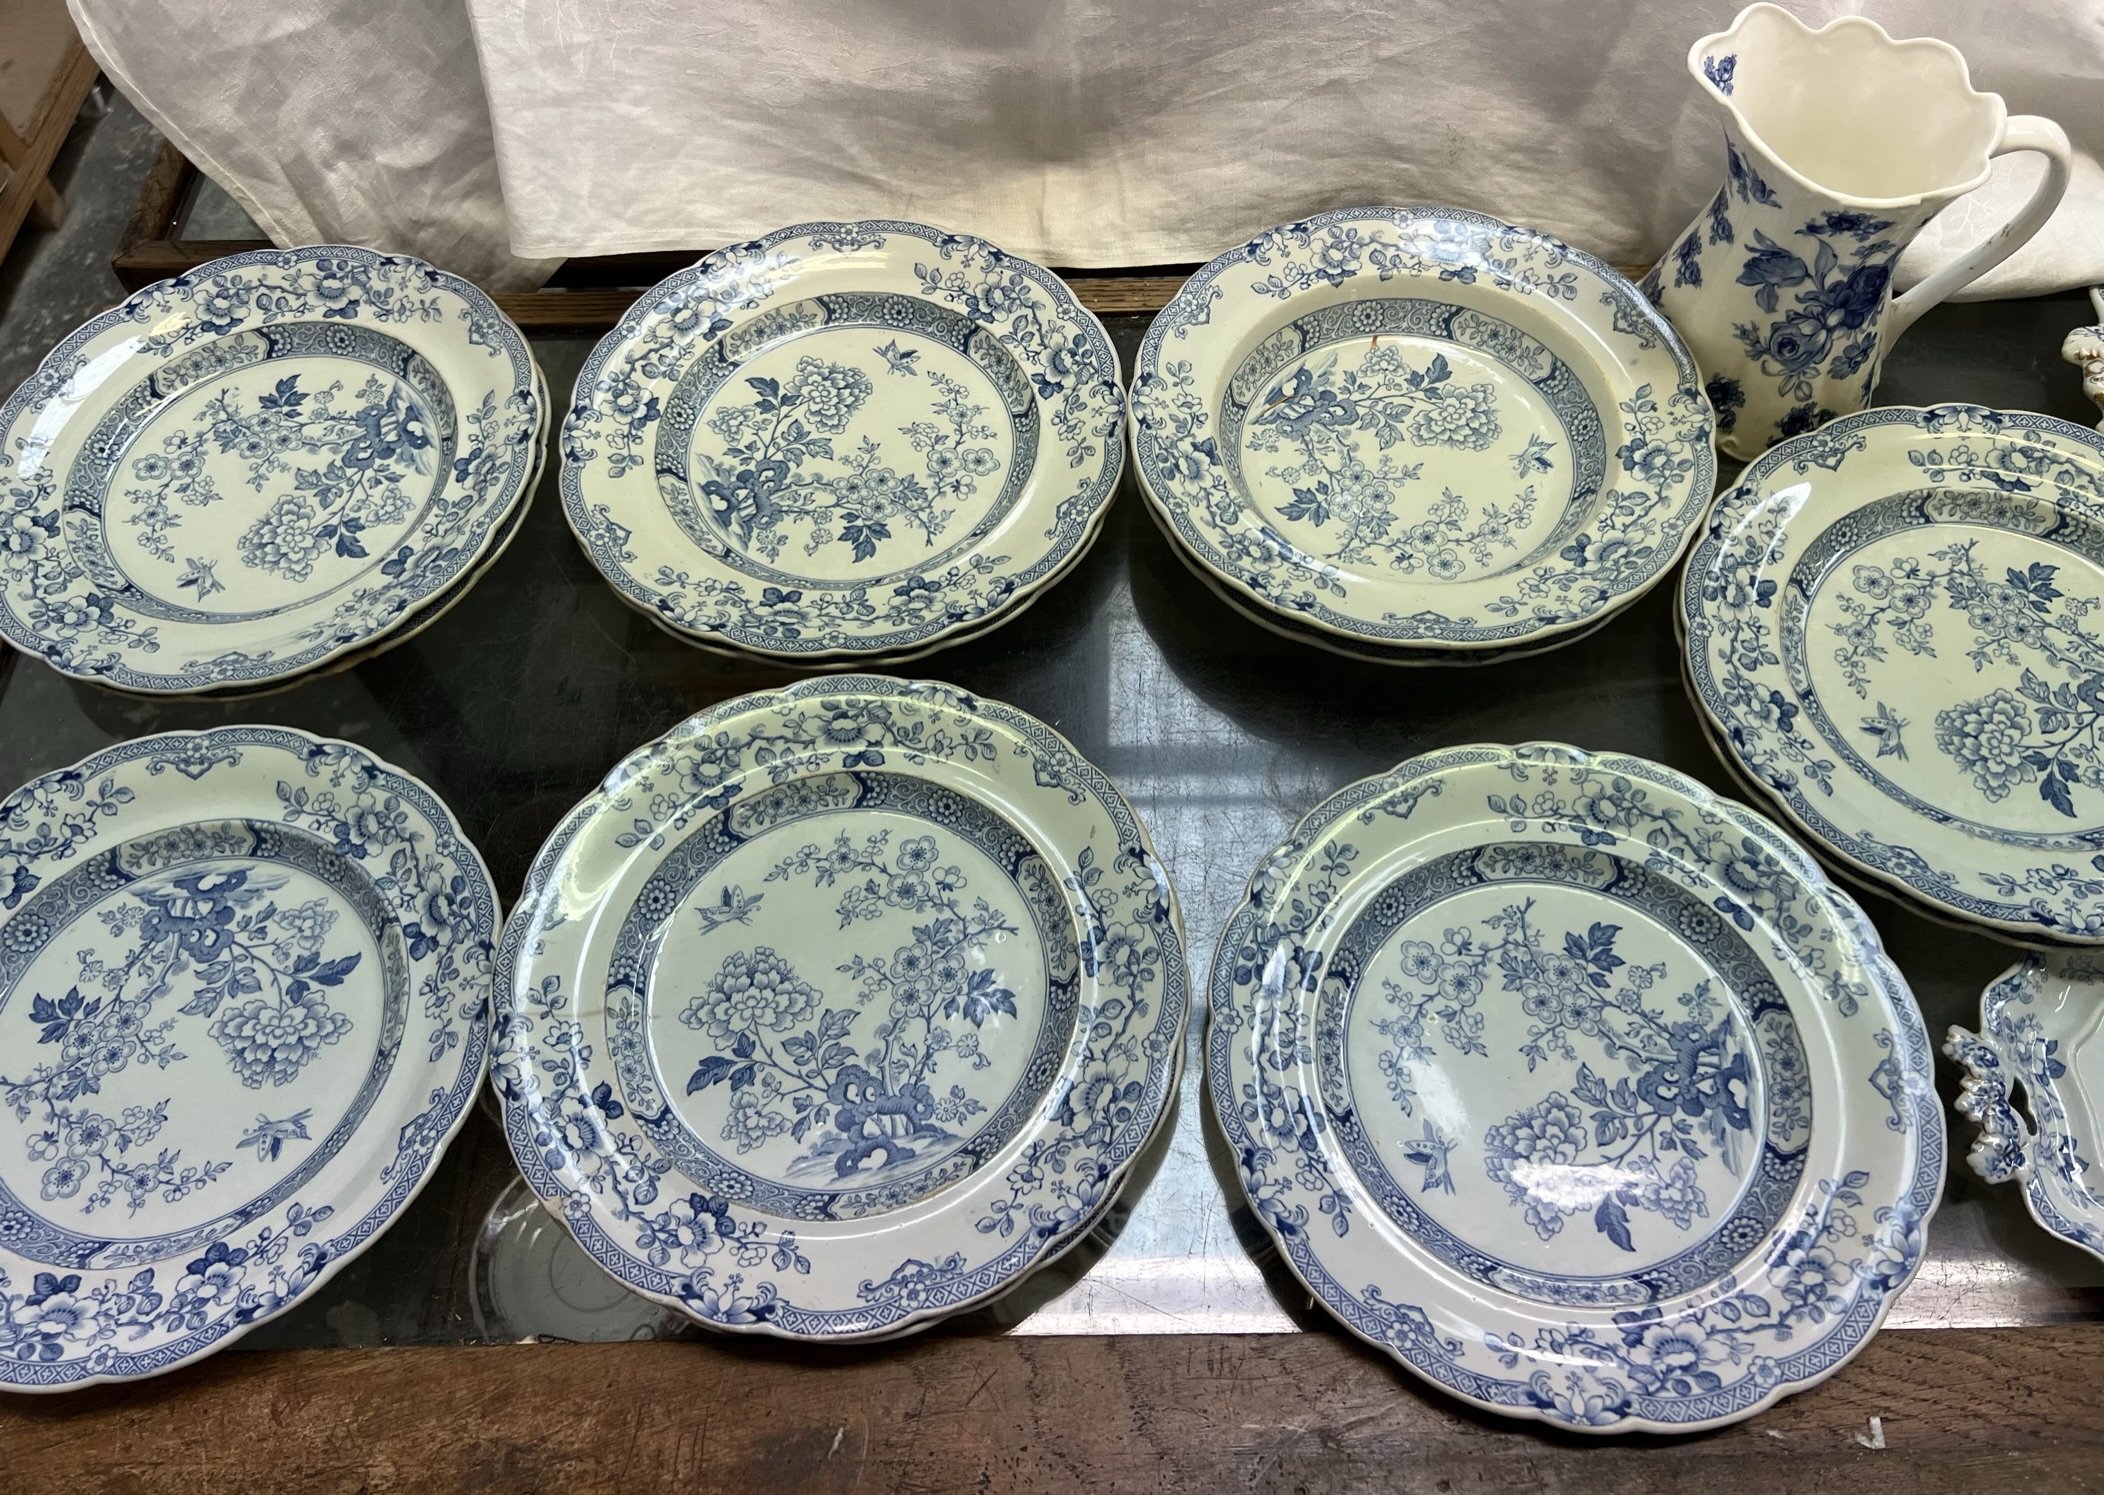 A 19th century Real Stone China Peruvian pattern part dinner set together with other decorative - Image 2 of 3